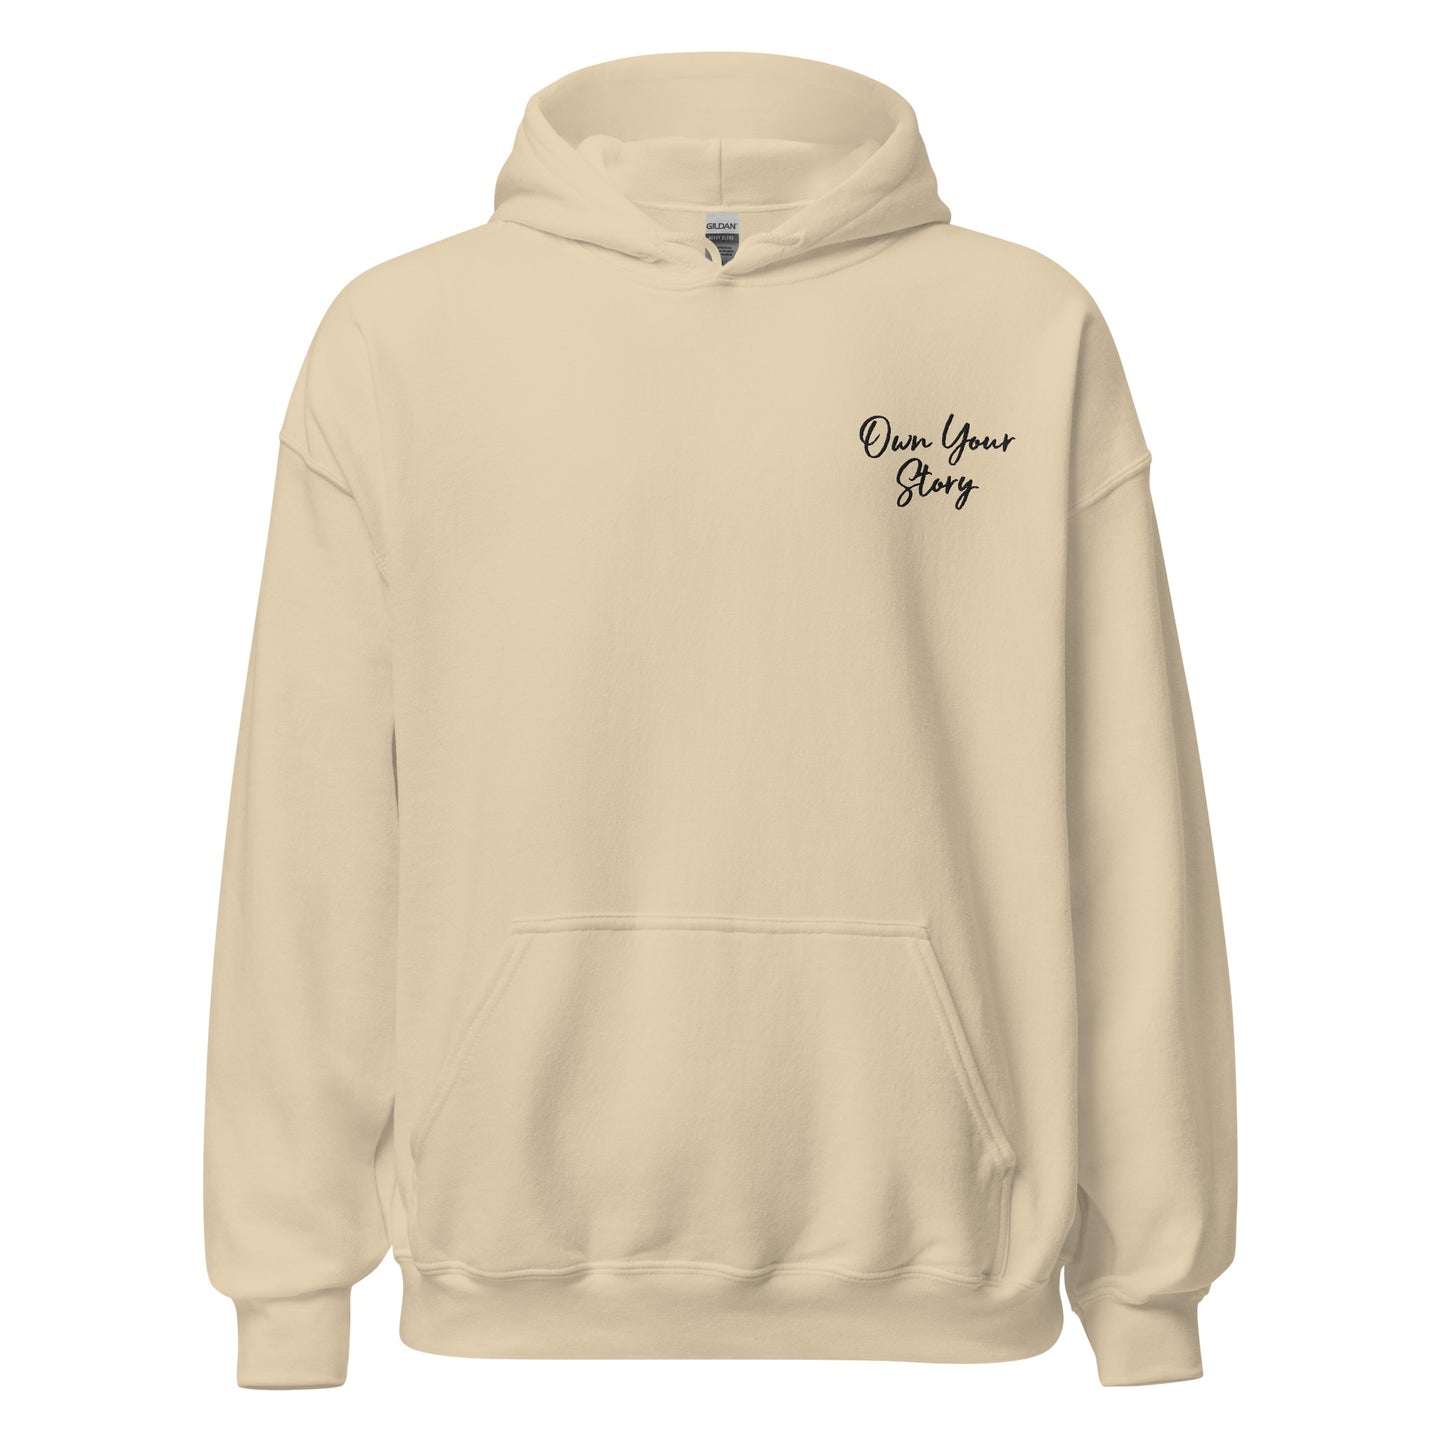 Embroidered Own Your Story Hooded Sweatshirt